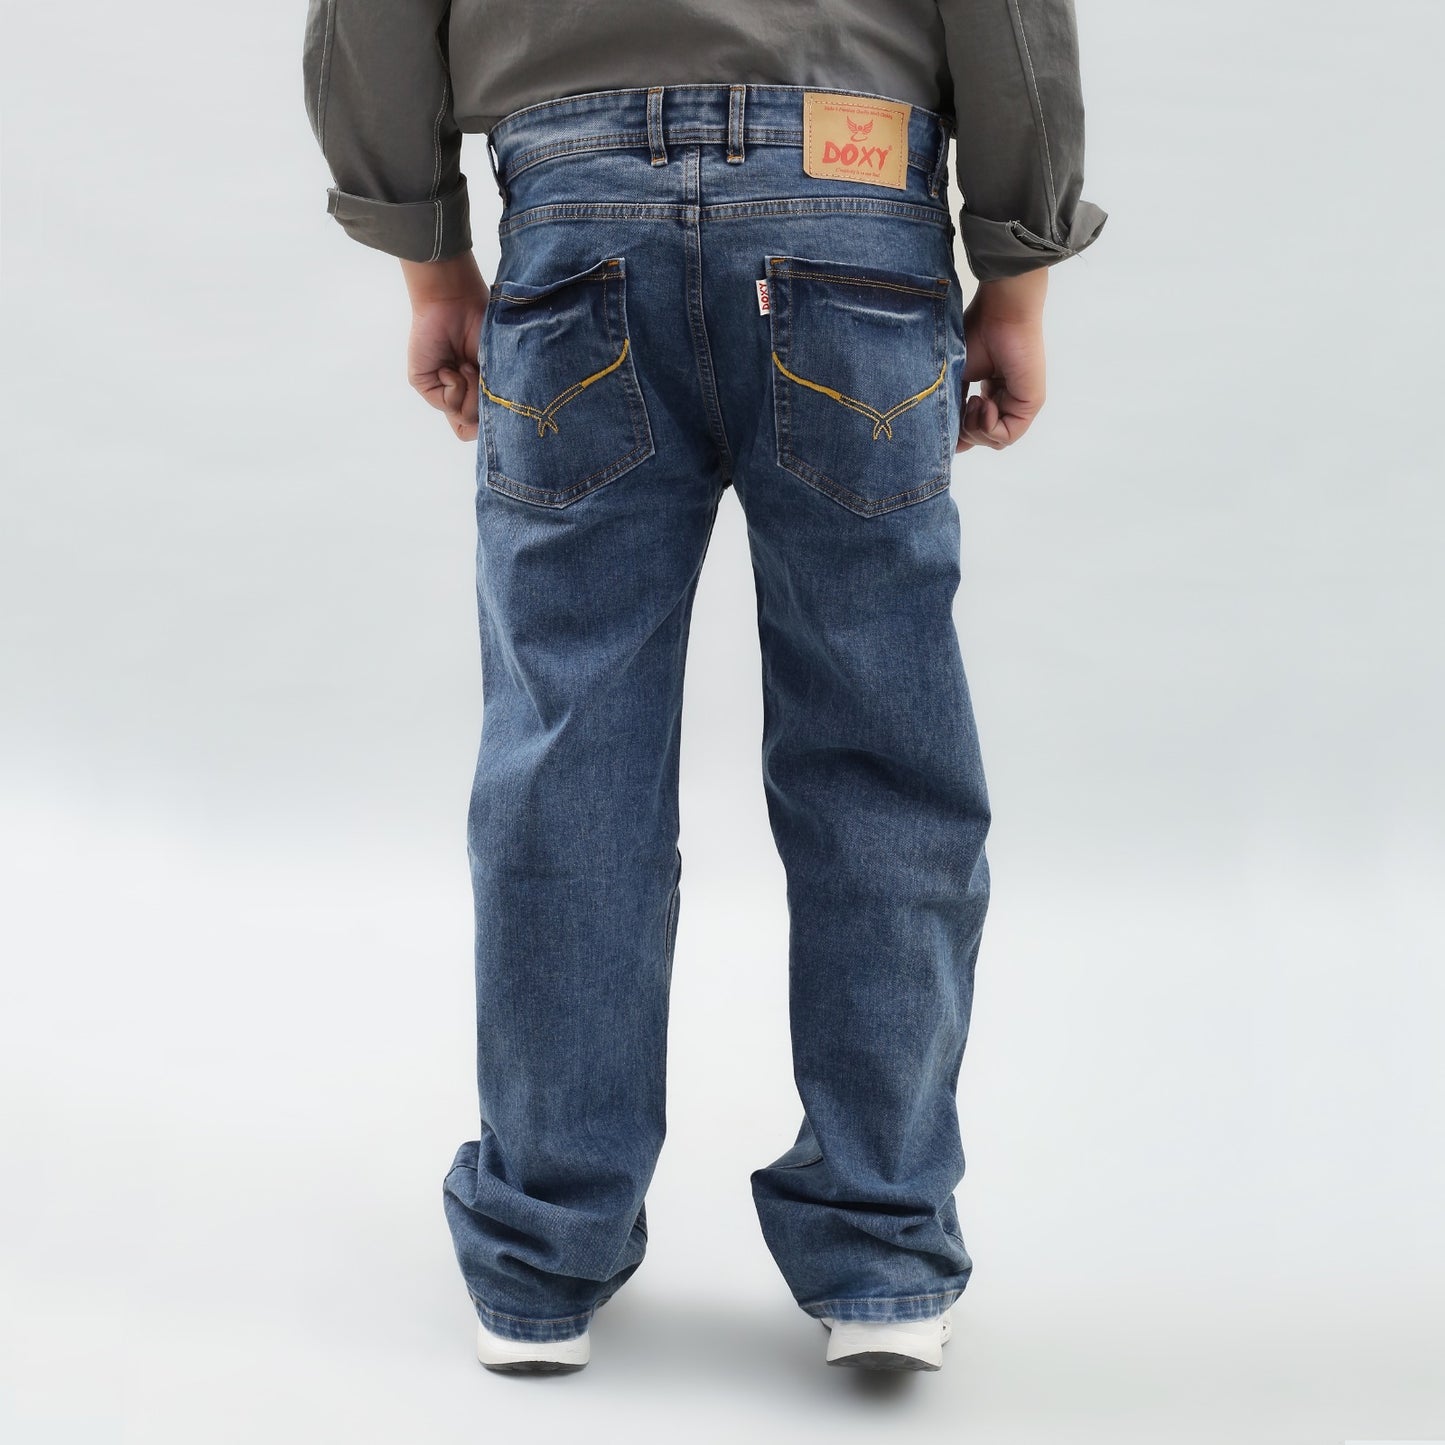 ZAPPY MID BLUE BASIC BAGGY JEANS 6004